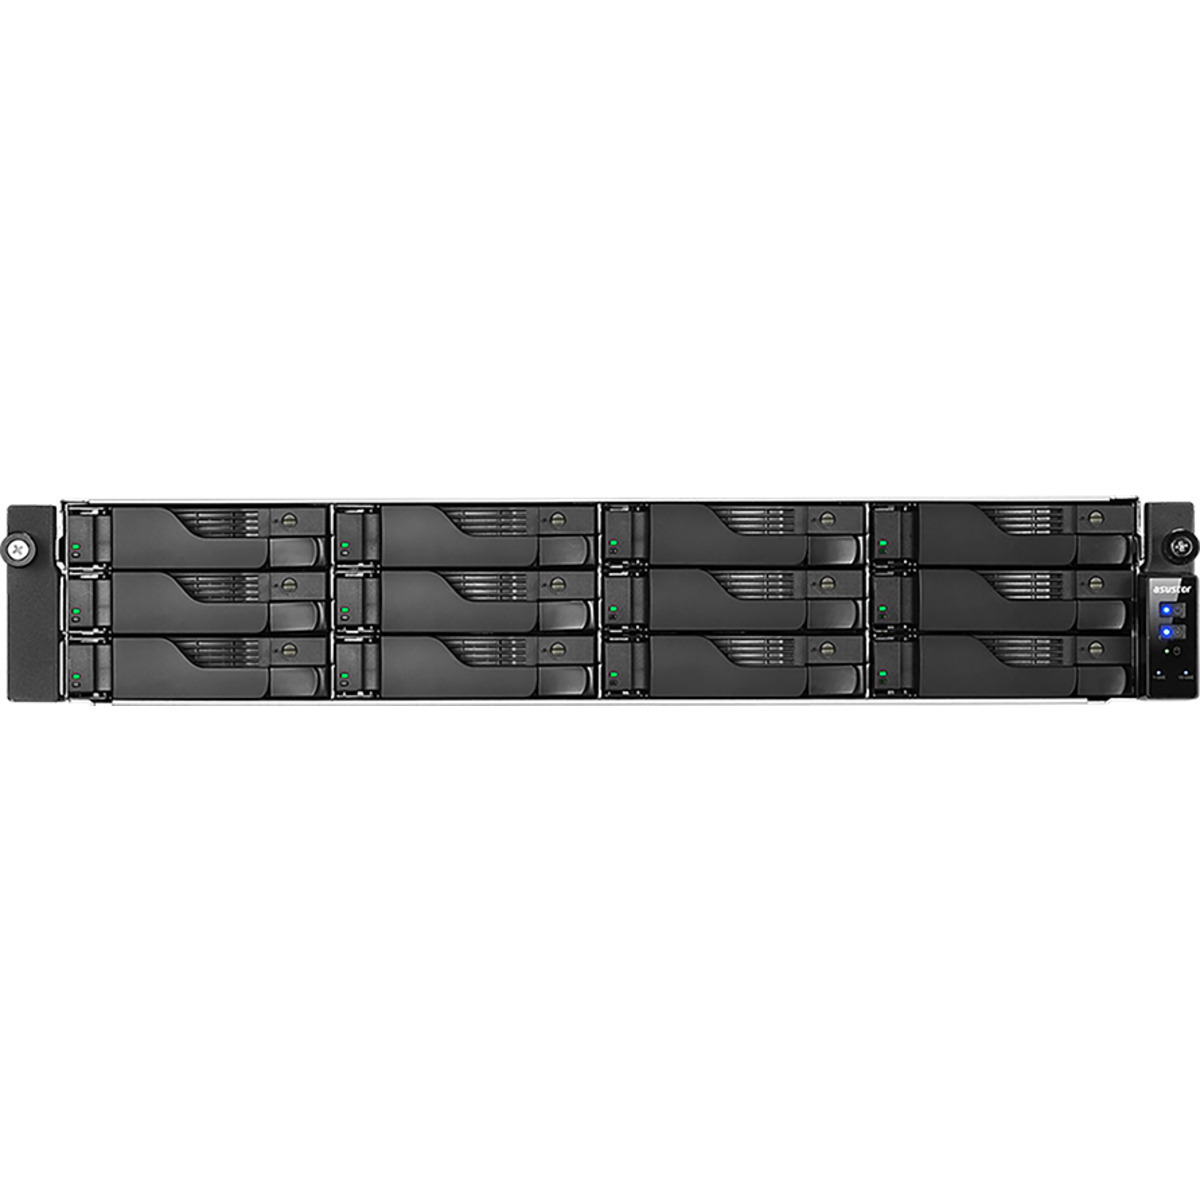 buy ASUSTOR LOCKERSTOR 12RD AS6512RD 288tb RackMount NAS - Network Attached Storage Device 12x24000gb Western Digital Ultrastar HC580 WUH722424ALE6L4 3.5 7200rpm SATA 6Gb/s HDD ENTERPRISE Class Drives Installed - Burn-In Tested - FREE RAM UPGRADE - nas headquarters buy network attached storage server device das new raid-5 free shipping simply usa LOCKERSTOR 12RD AS6512RD